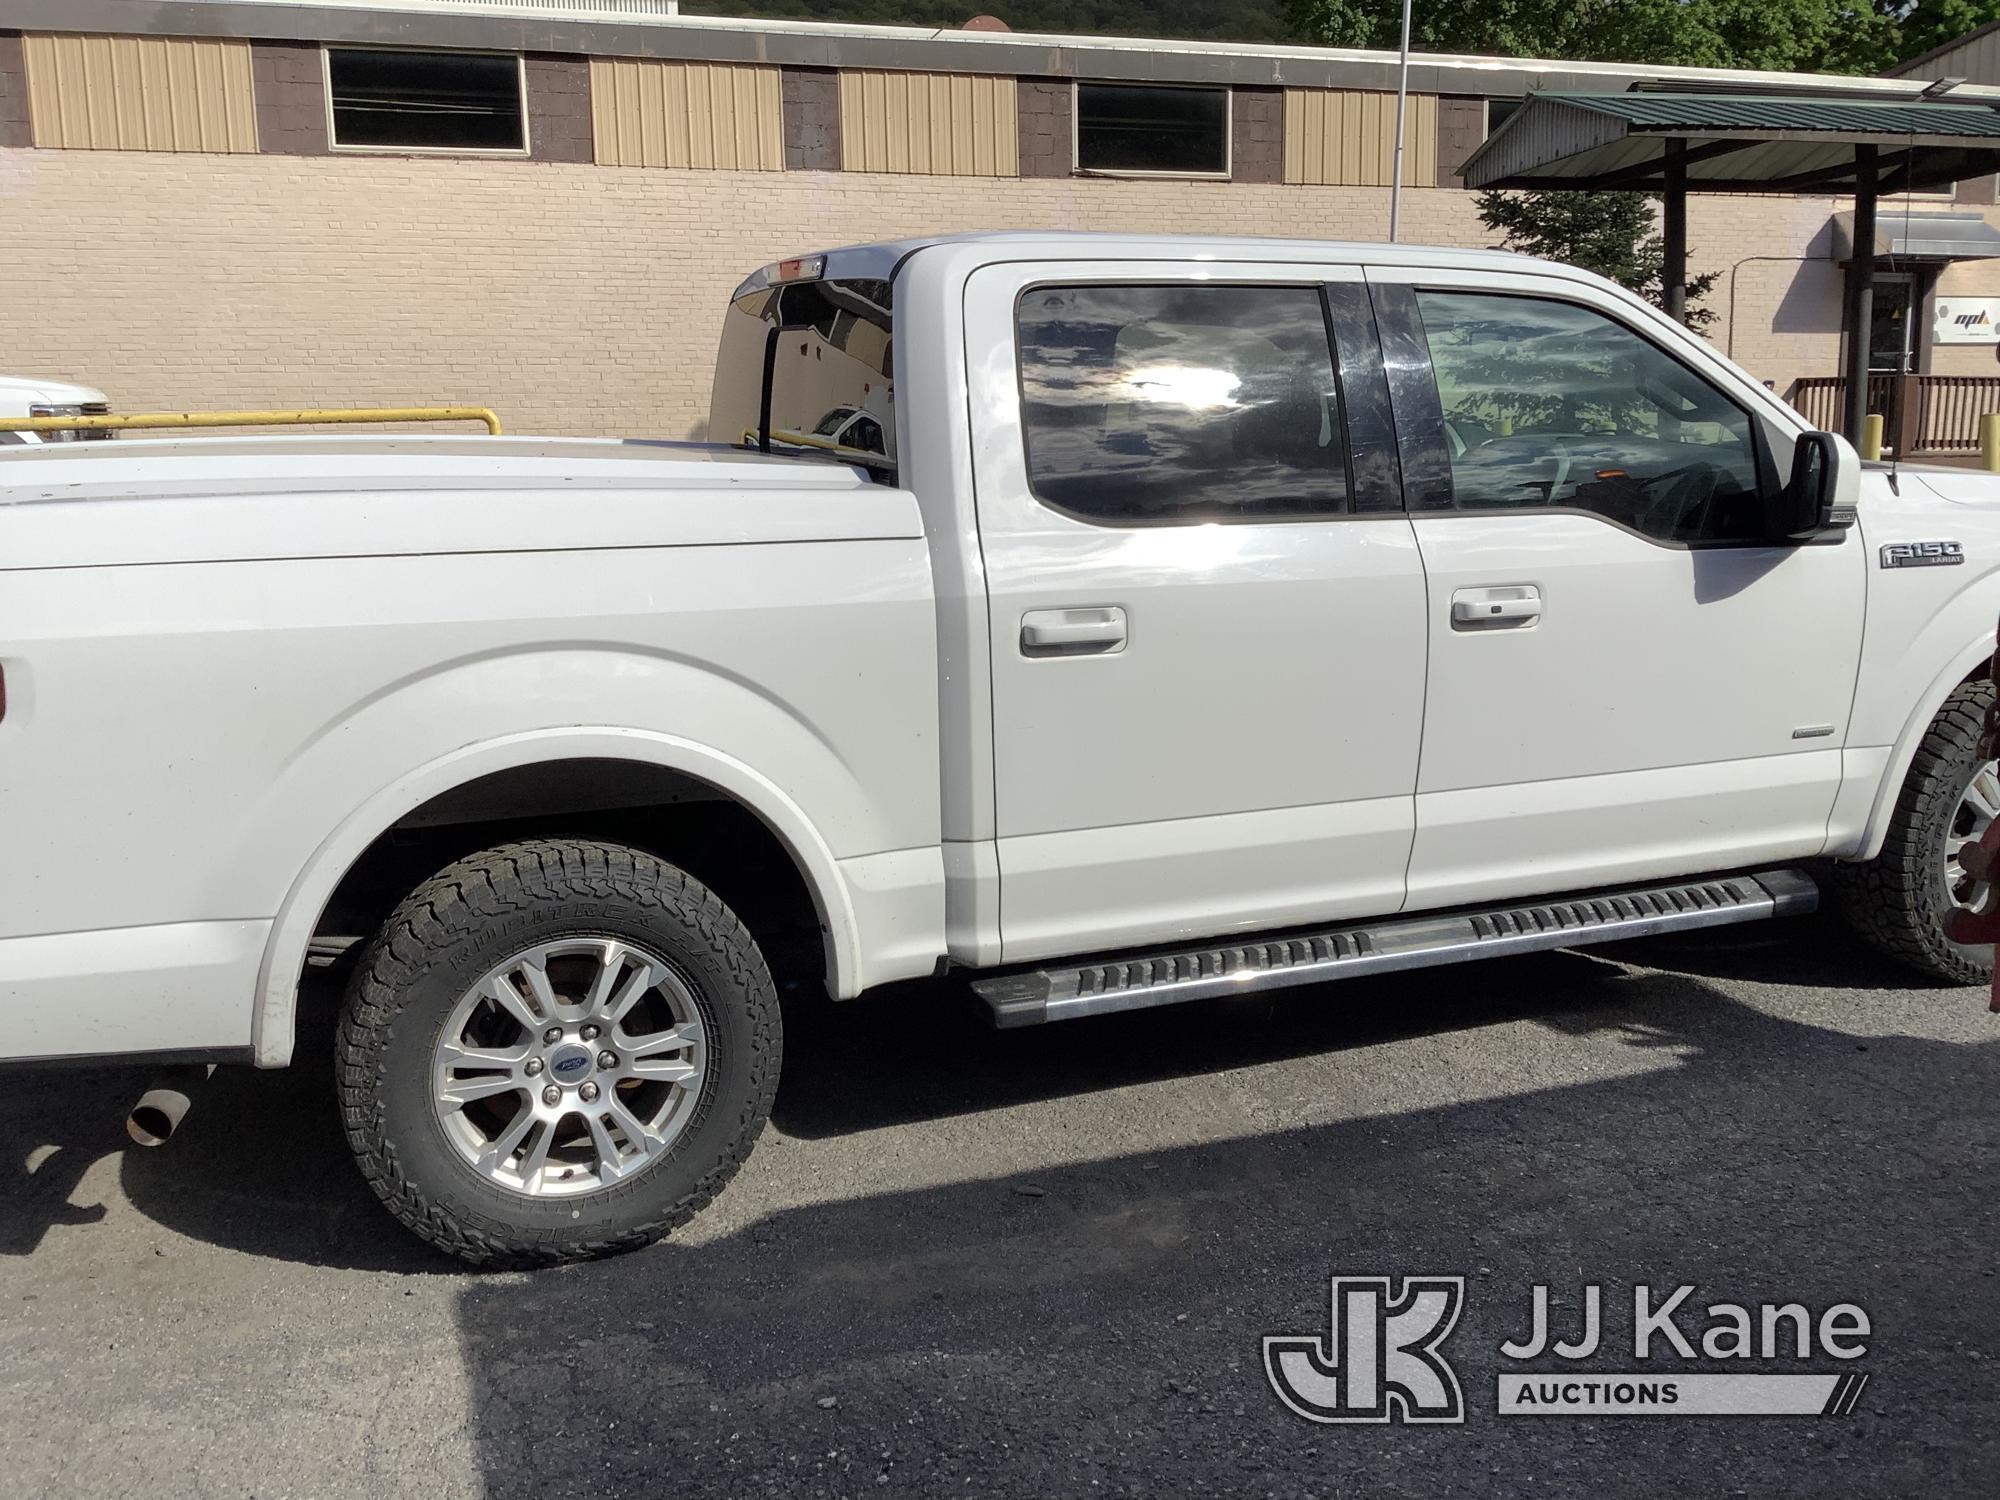 (Lavale, MD) 2017 Ford F150 4x4 Crew-Cab Pickup Truck Runs & Moves